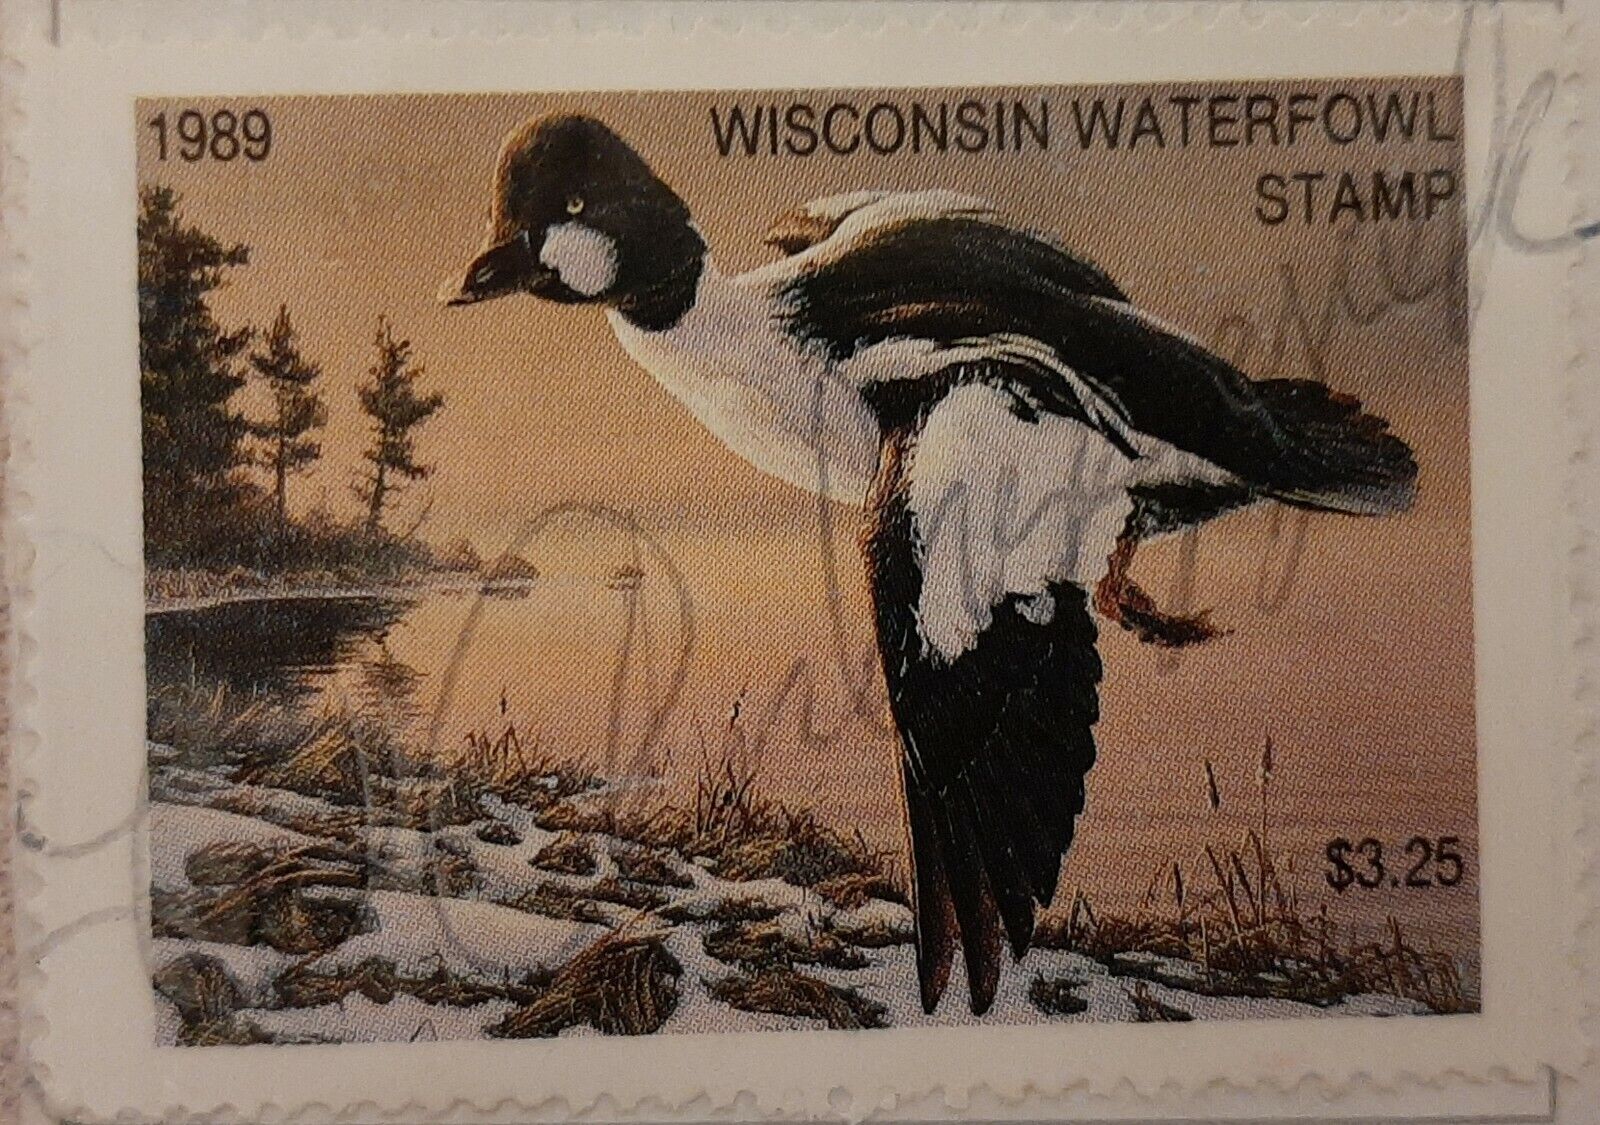 1989 Wisconsin Department of Natural Resources State Waterfowl Stamp